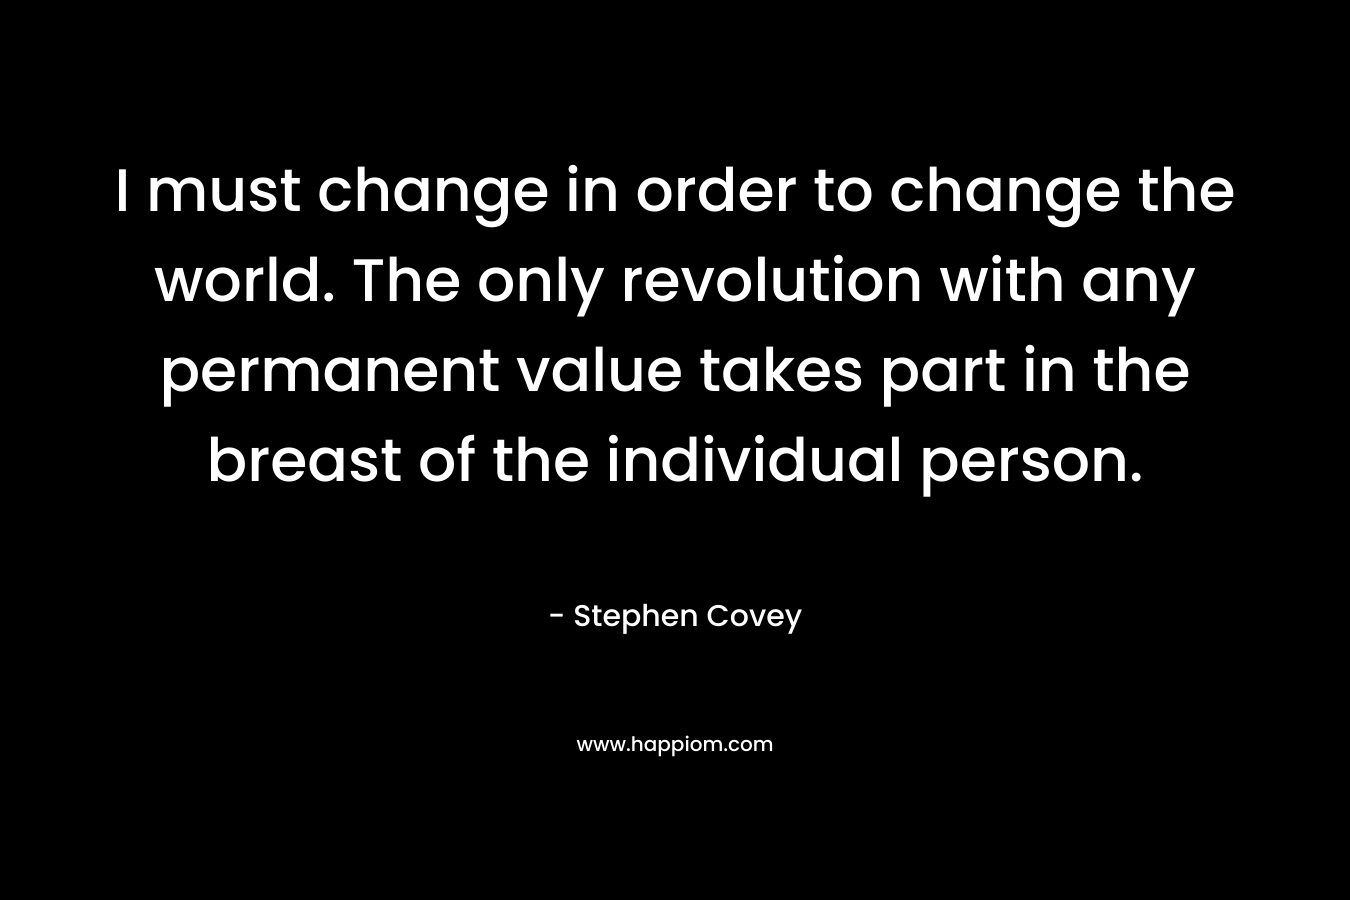 I must change in order to change the world. The only revolution with any permanent value takes part in the breast of the individual person.